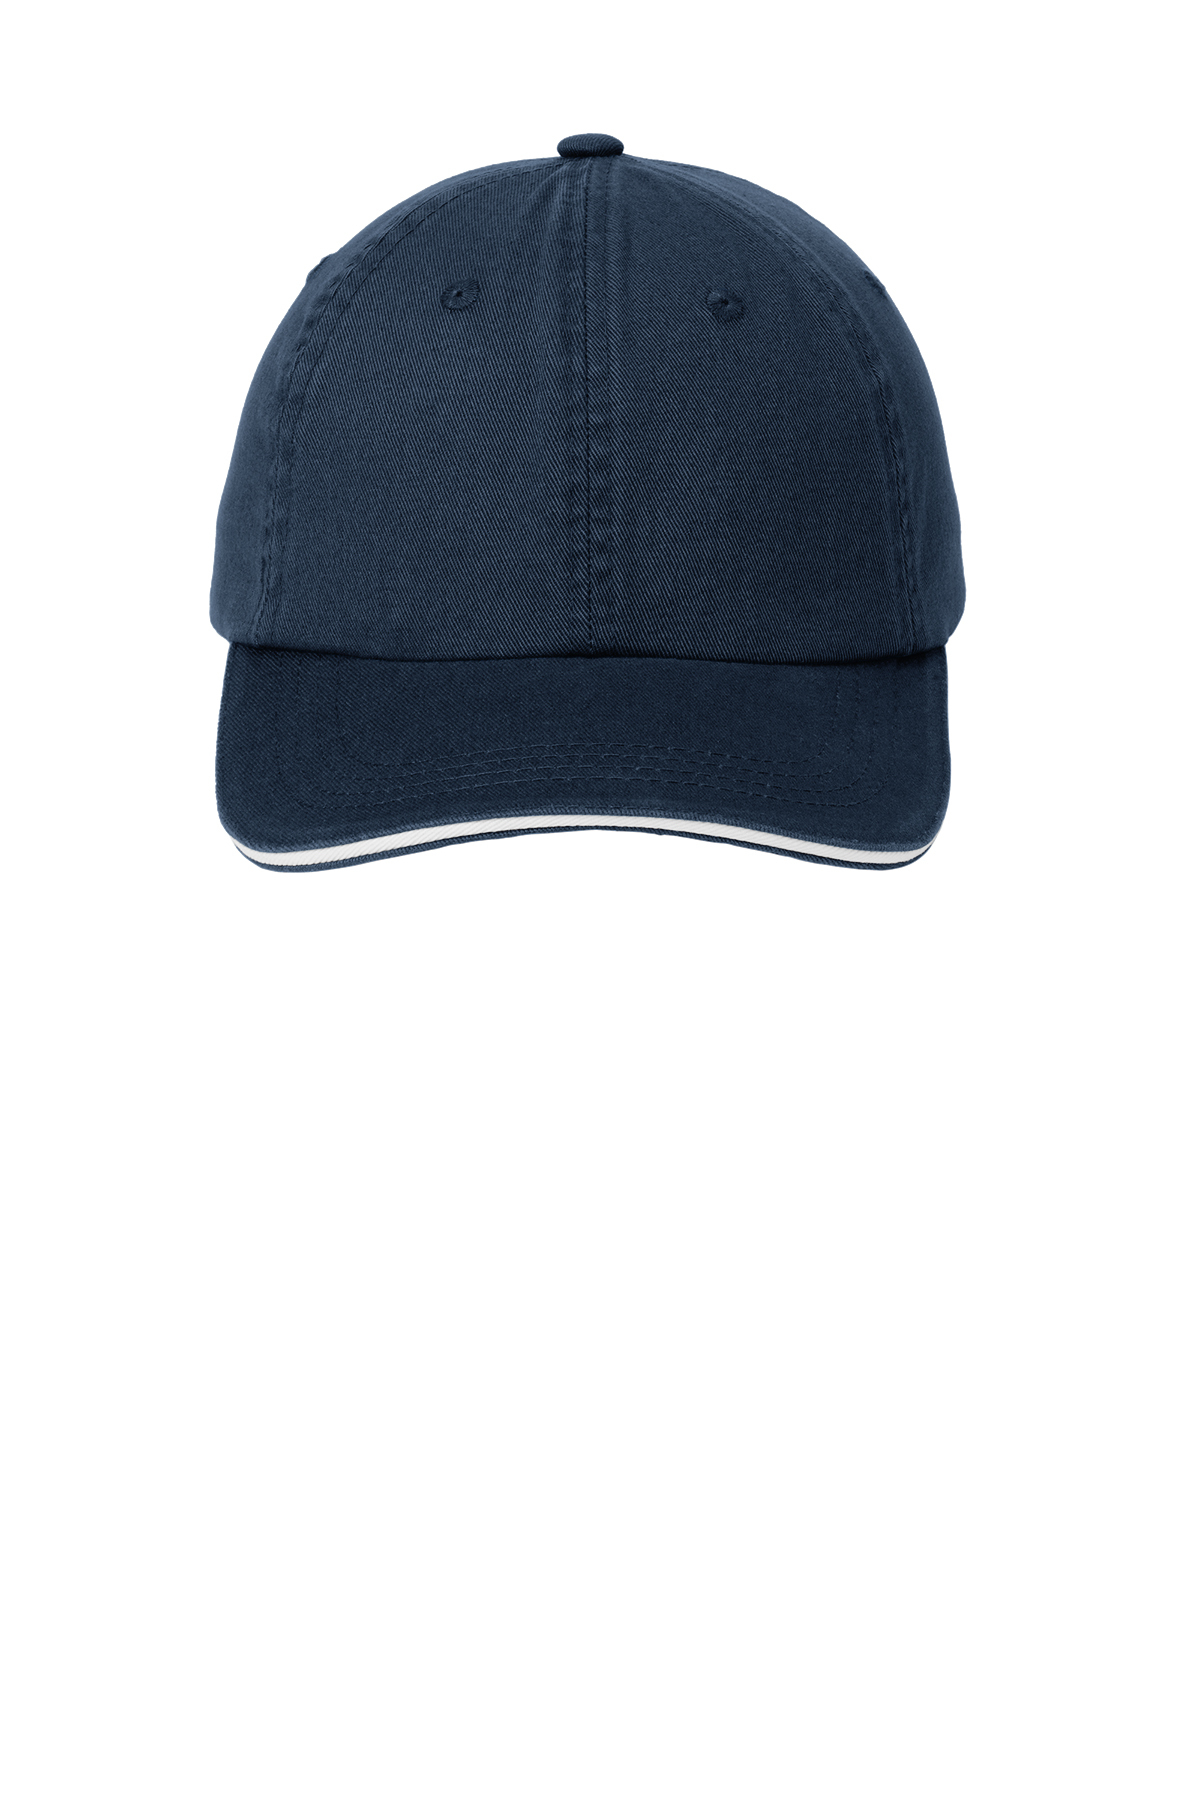 Port Authority Sandwich Bill Cap with Striped Closure | Product | SanMar